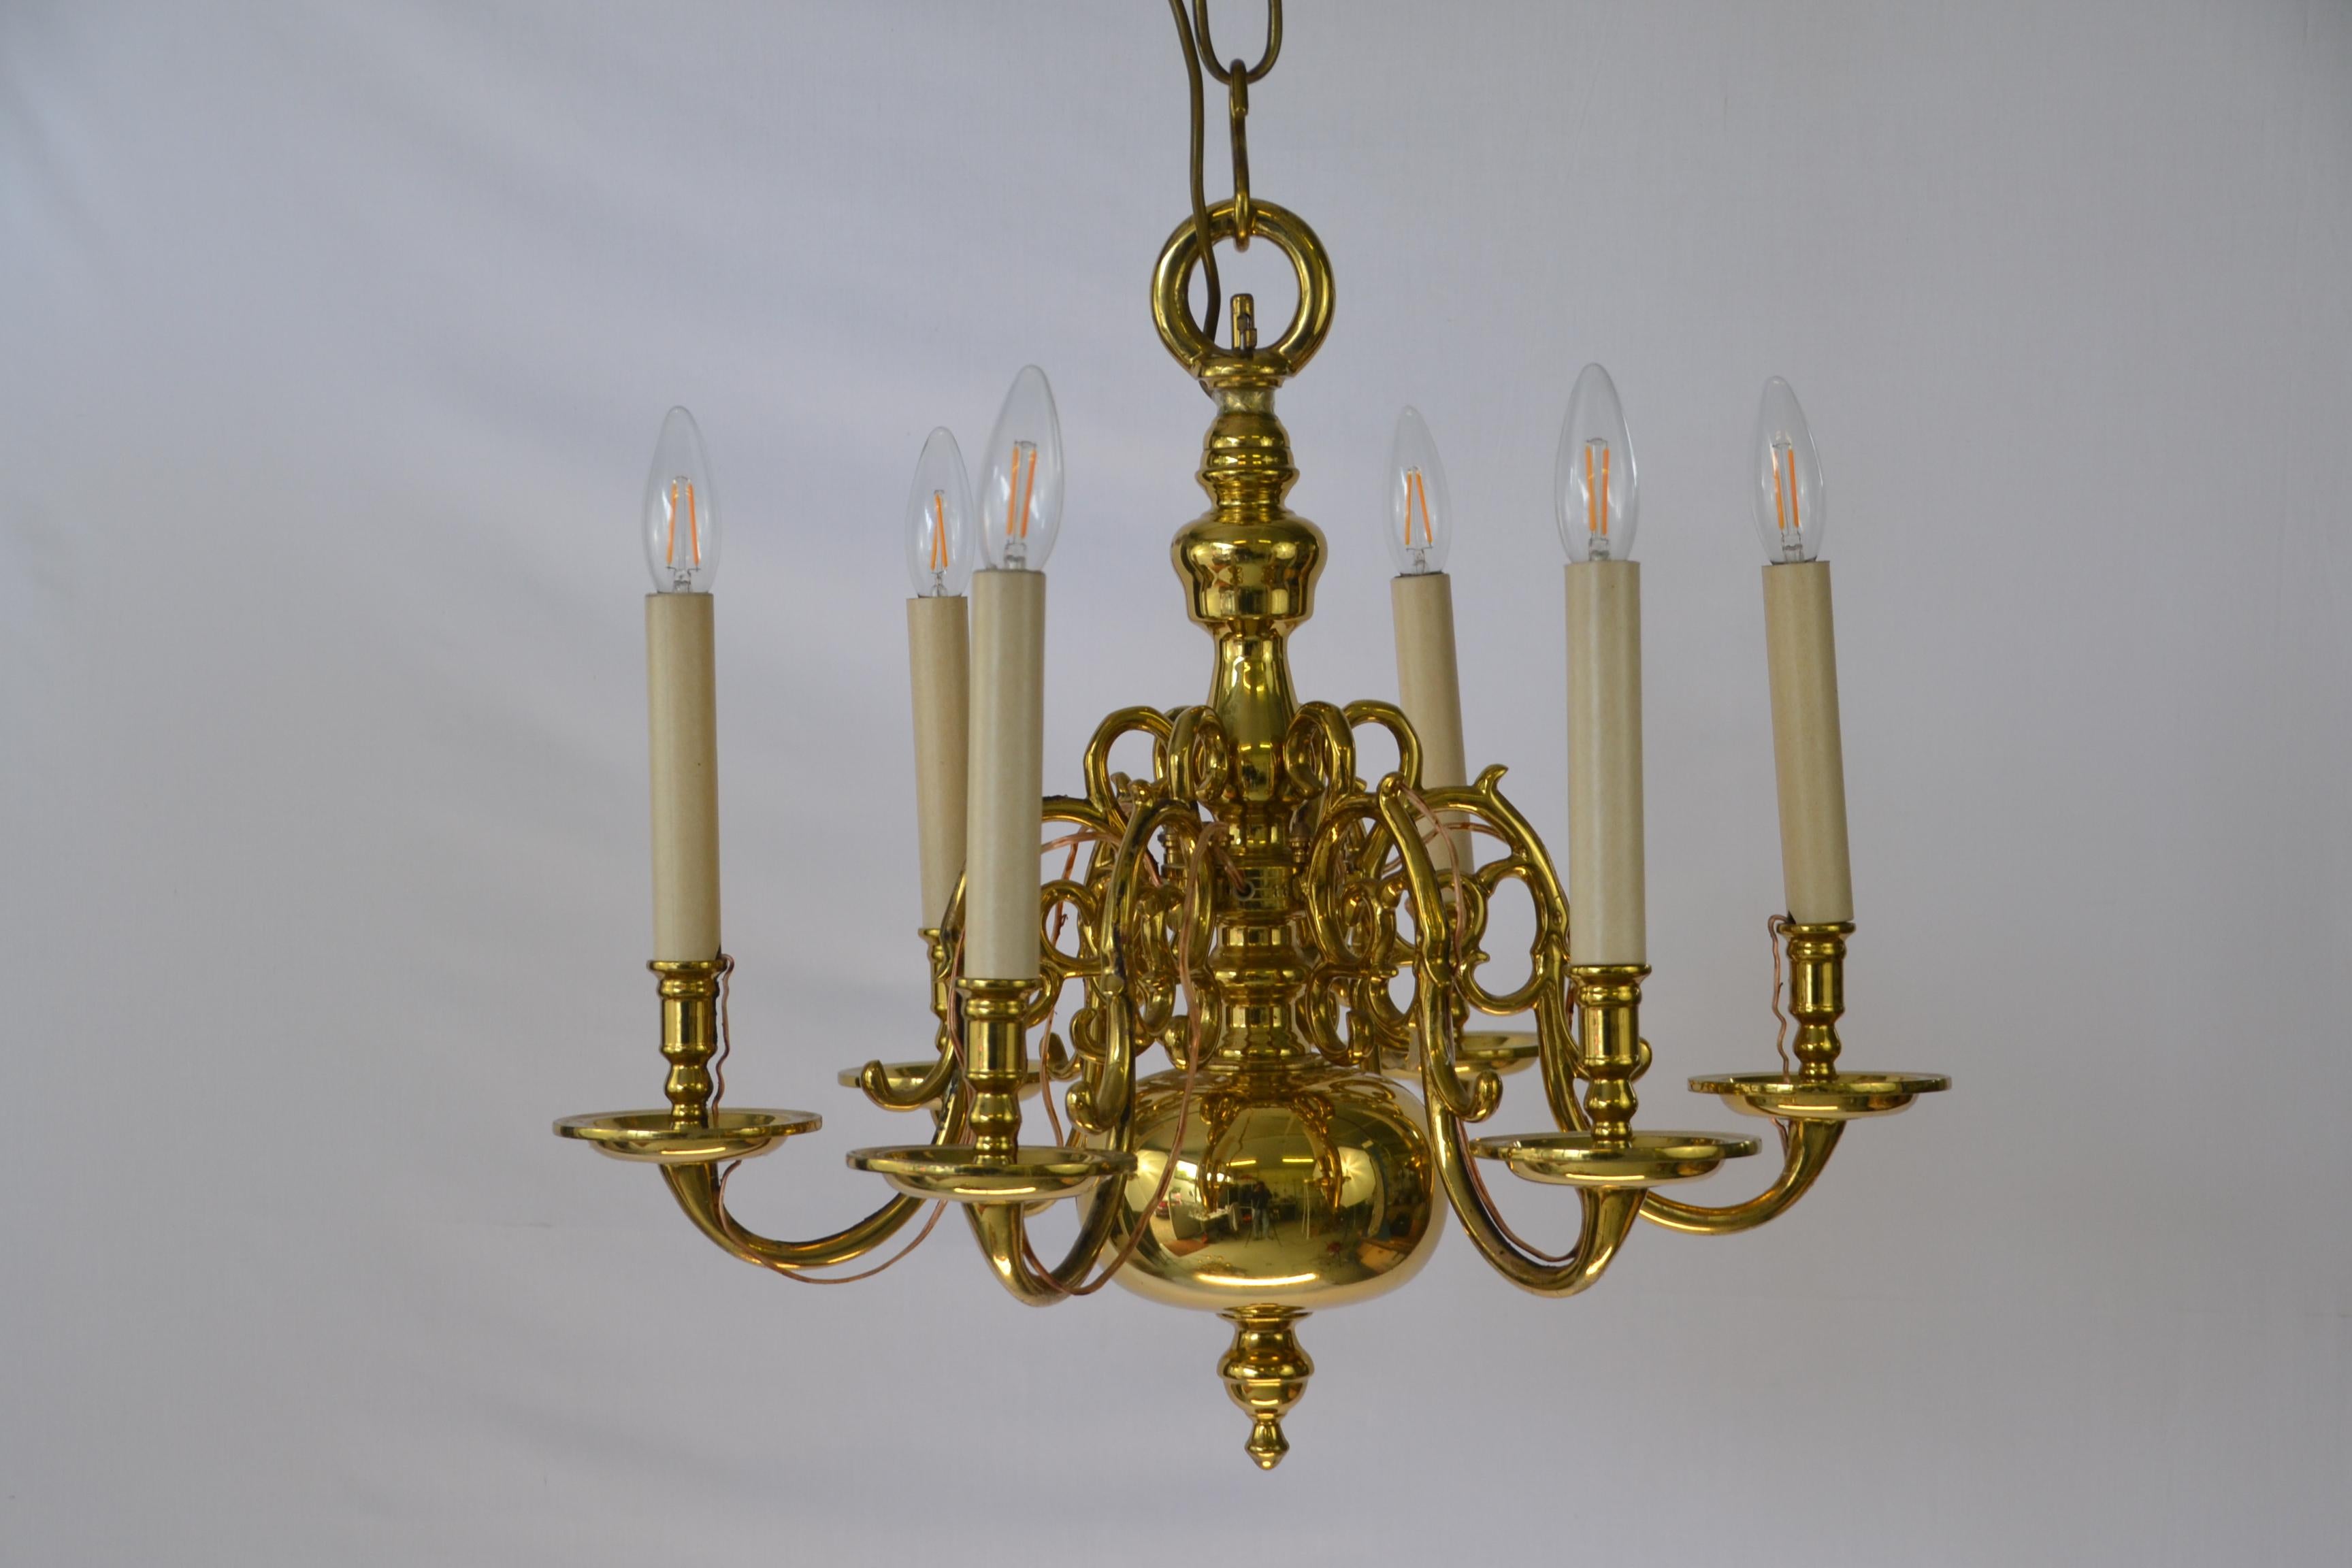 1 Tier 17th Century Electric Model Dutch Brass Chandelier with 6 Lights H54xW57 For Sale 3